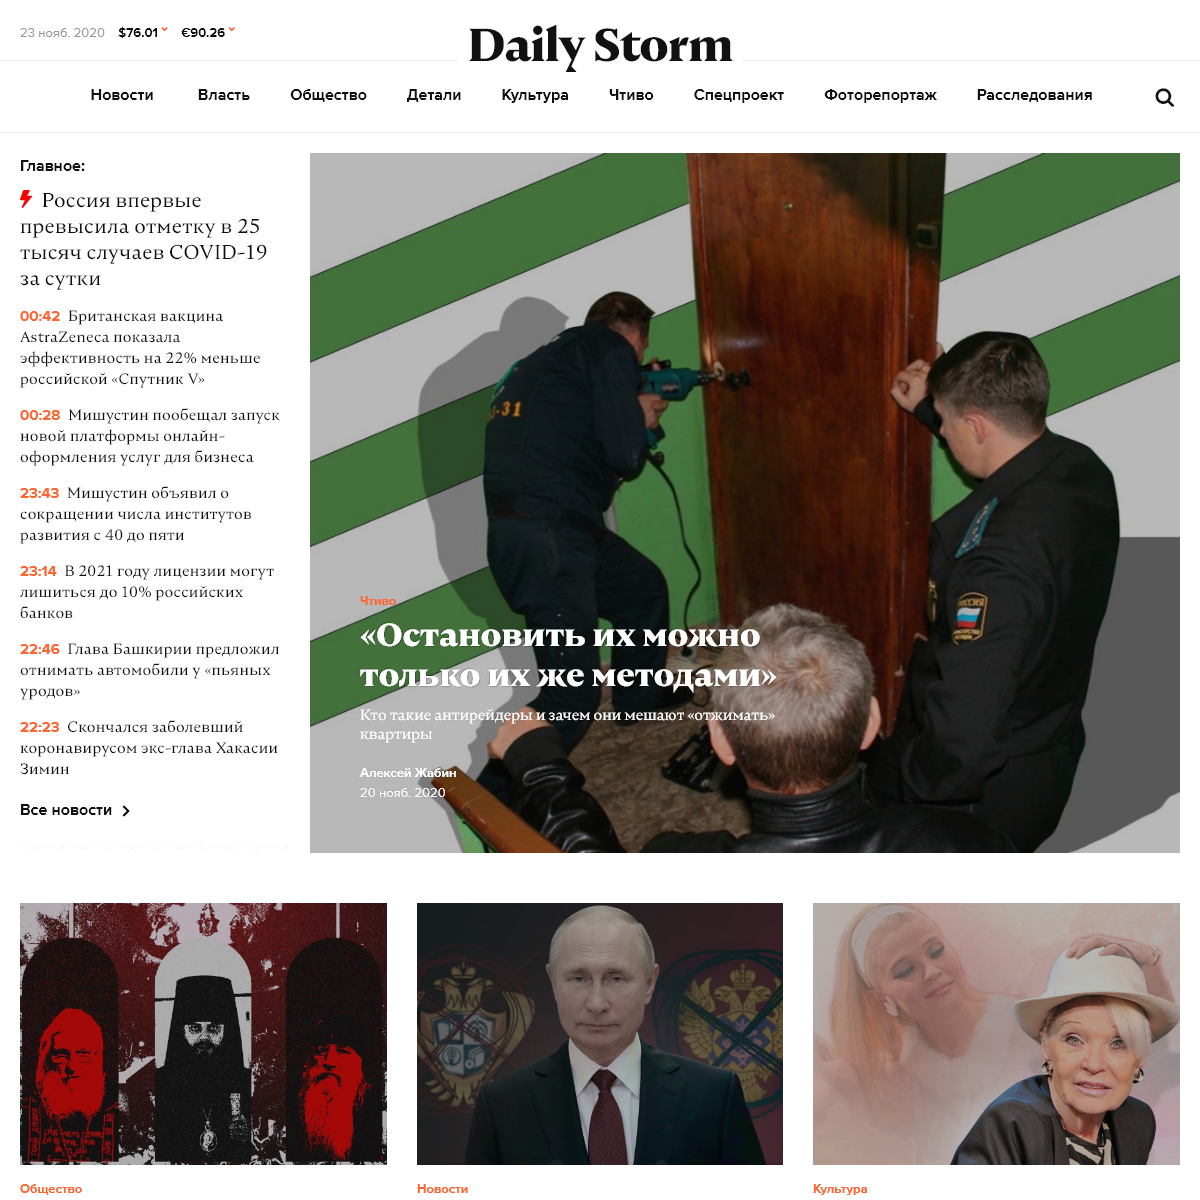 A complete backup of dailystorm.ru